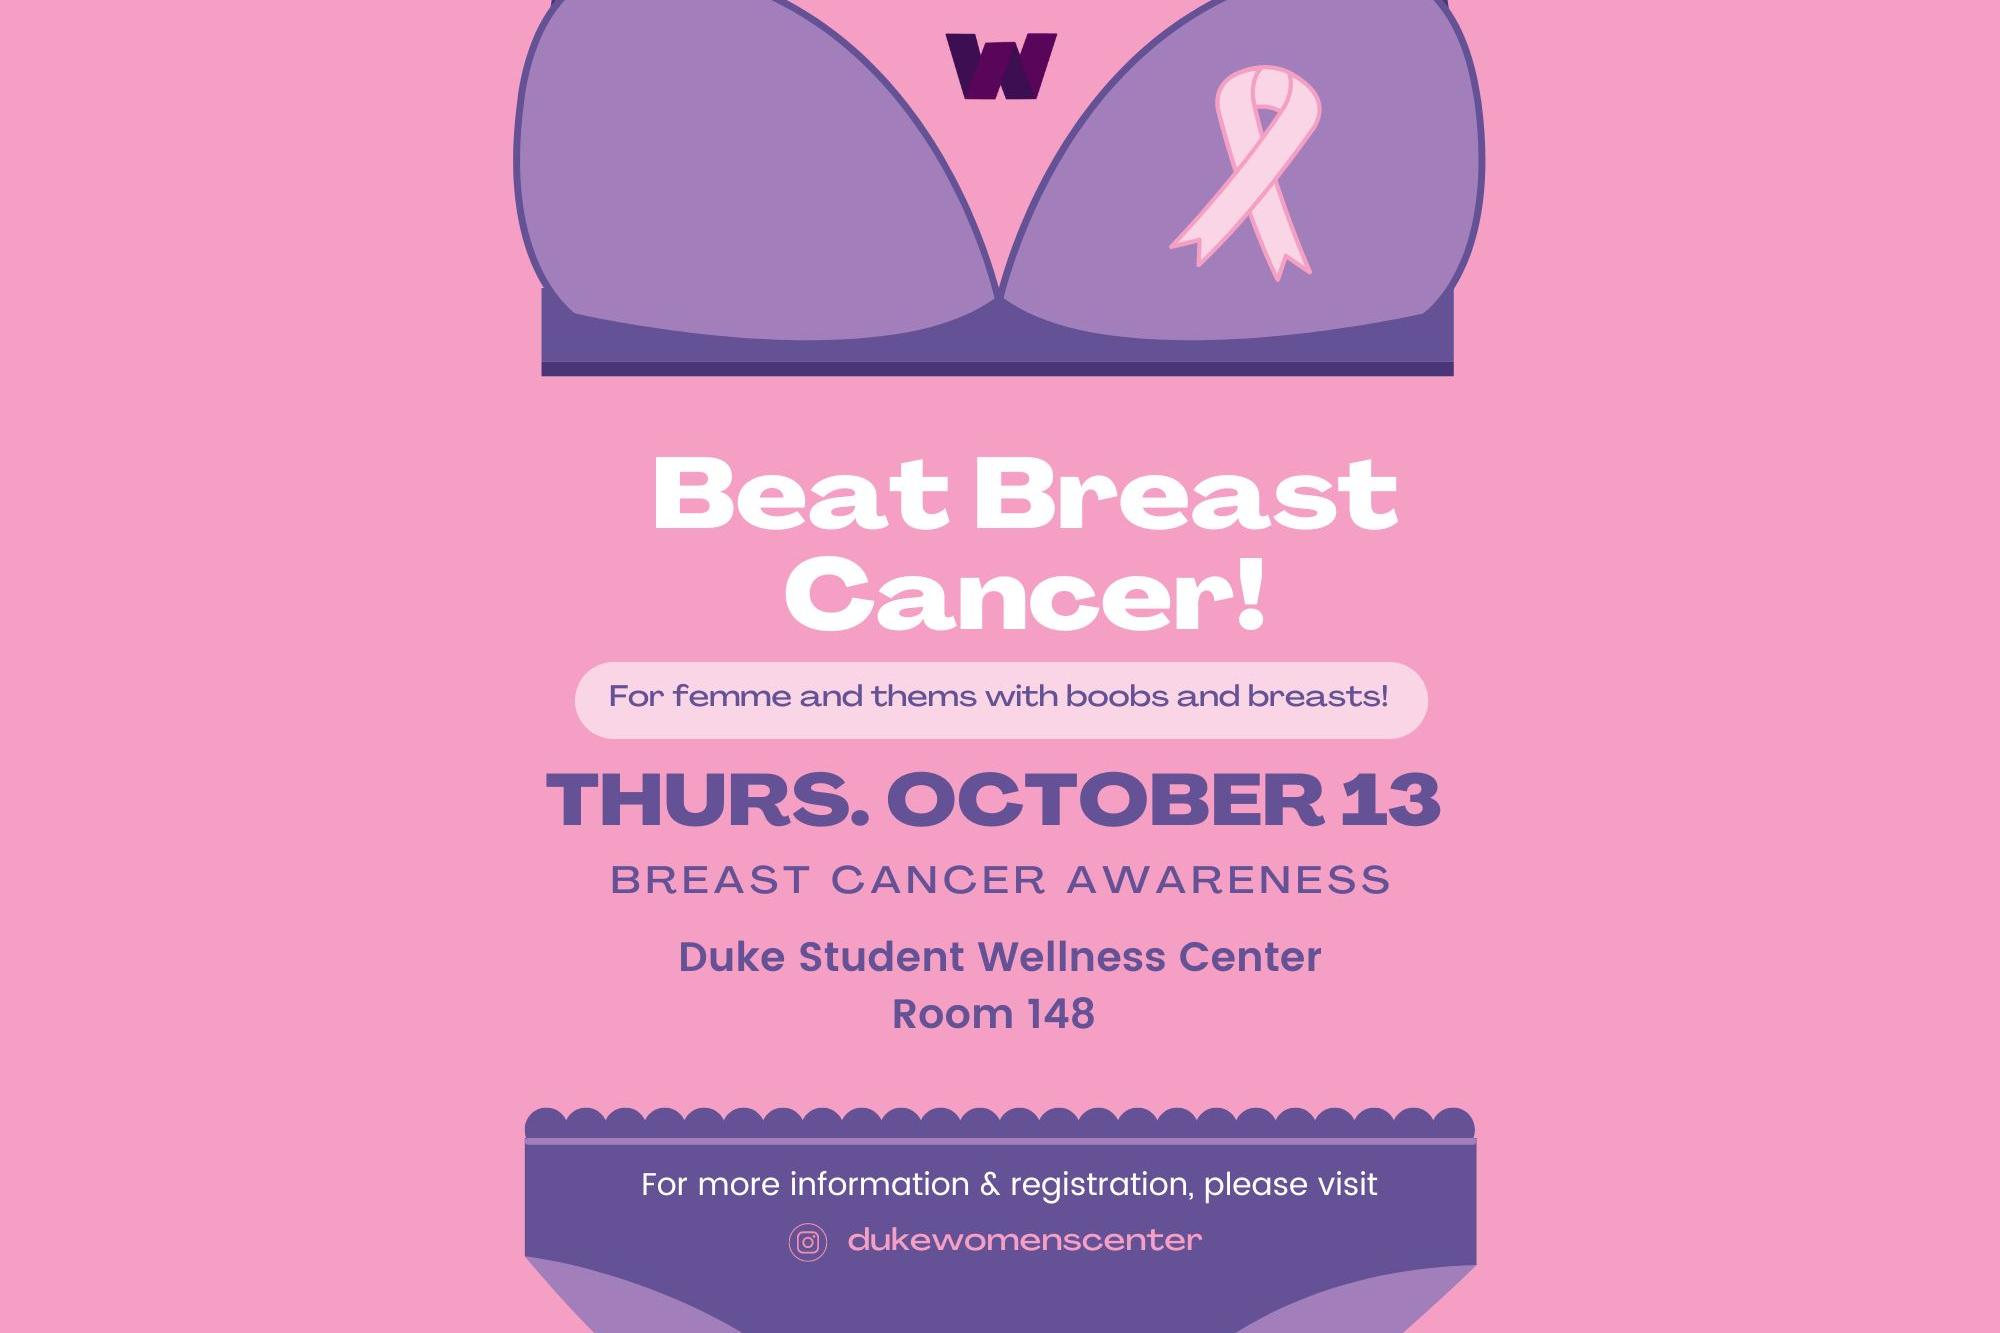 image text: Beat Breast Cancer Breast Cancer Awareness Month Event, for femme and them with boobs and breasts! event date: Thursday October 13 from 6-8pm at Duke Student Wellness Center Room 148. For more information visit @dukewomenscenter.